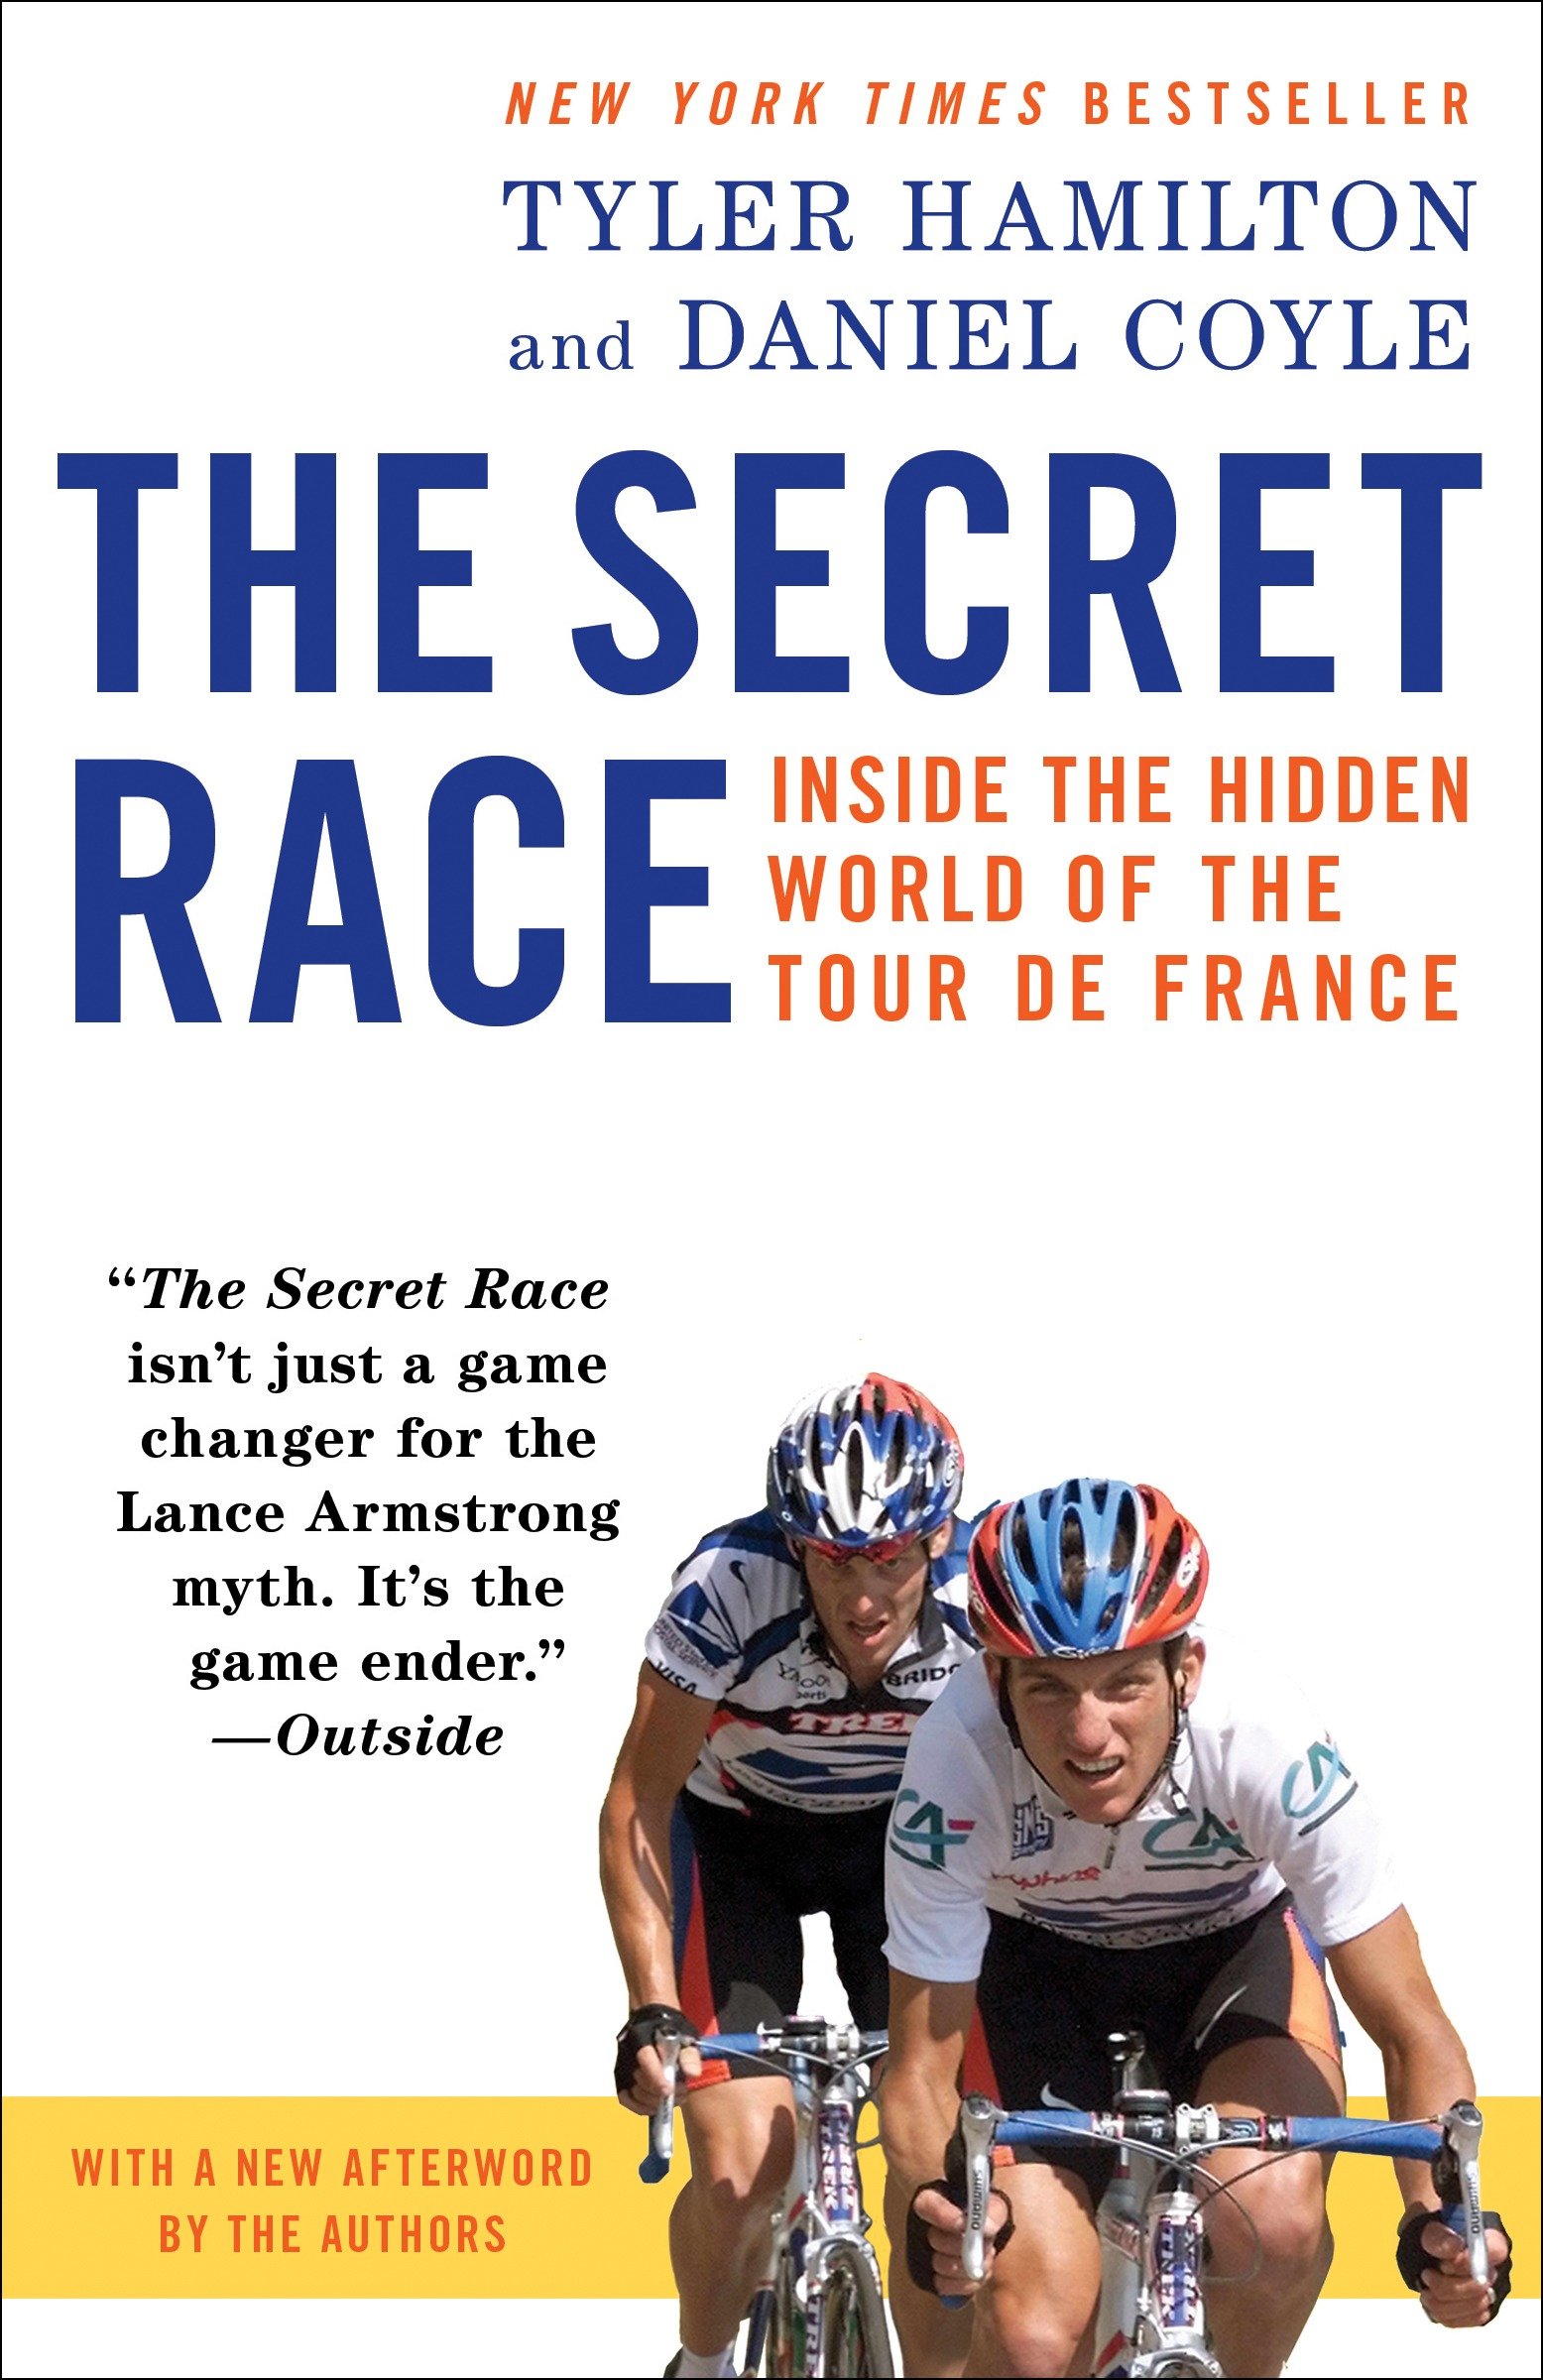 The secret race inside the hidden world of the Tour de France : doping, cover-ups, and winning at all costs cover image